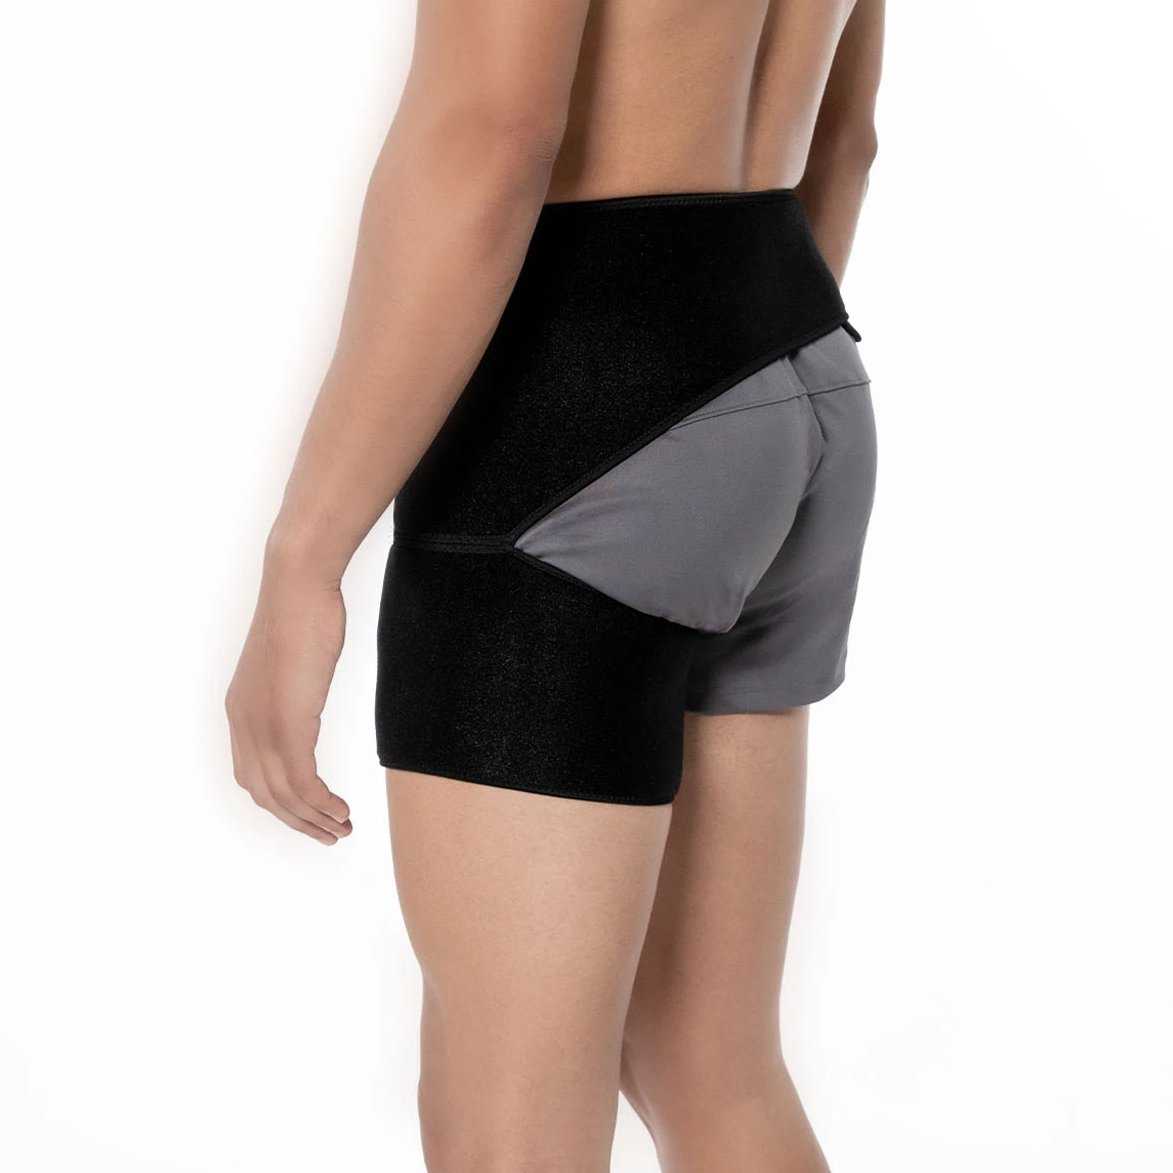 Copper-Infused Groin Thigh Sleeve & Hip Support Wrap - Unisex & Copper ...